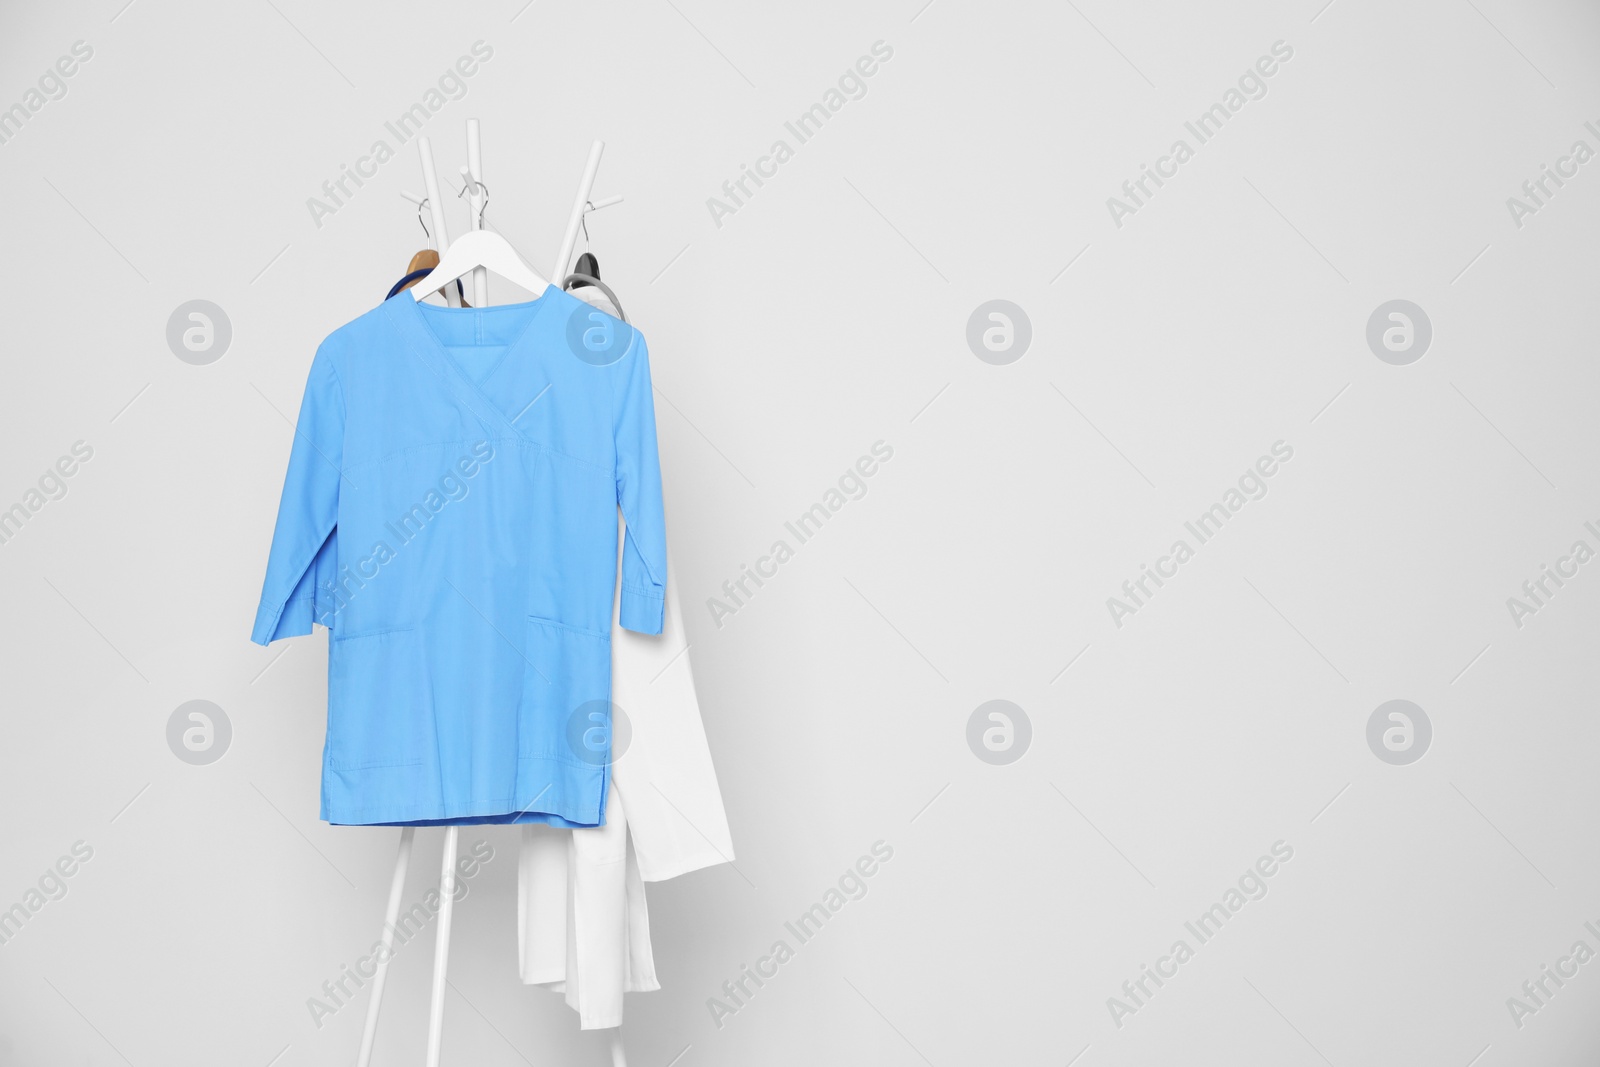 Photo of Medical uniforms hanging on rack against light grey background. Space for text